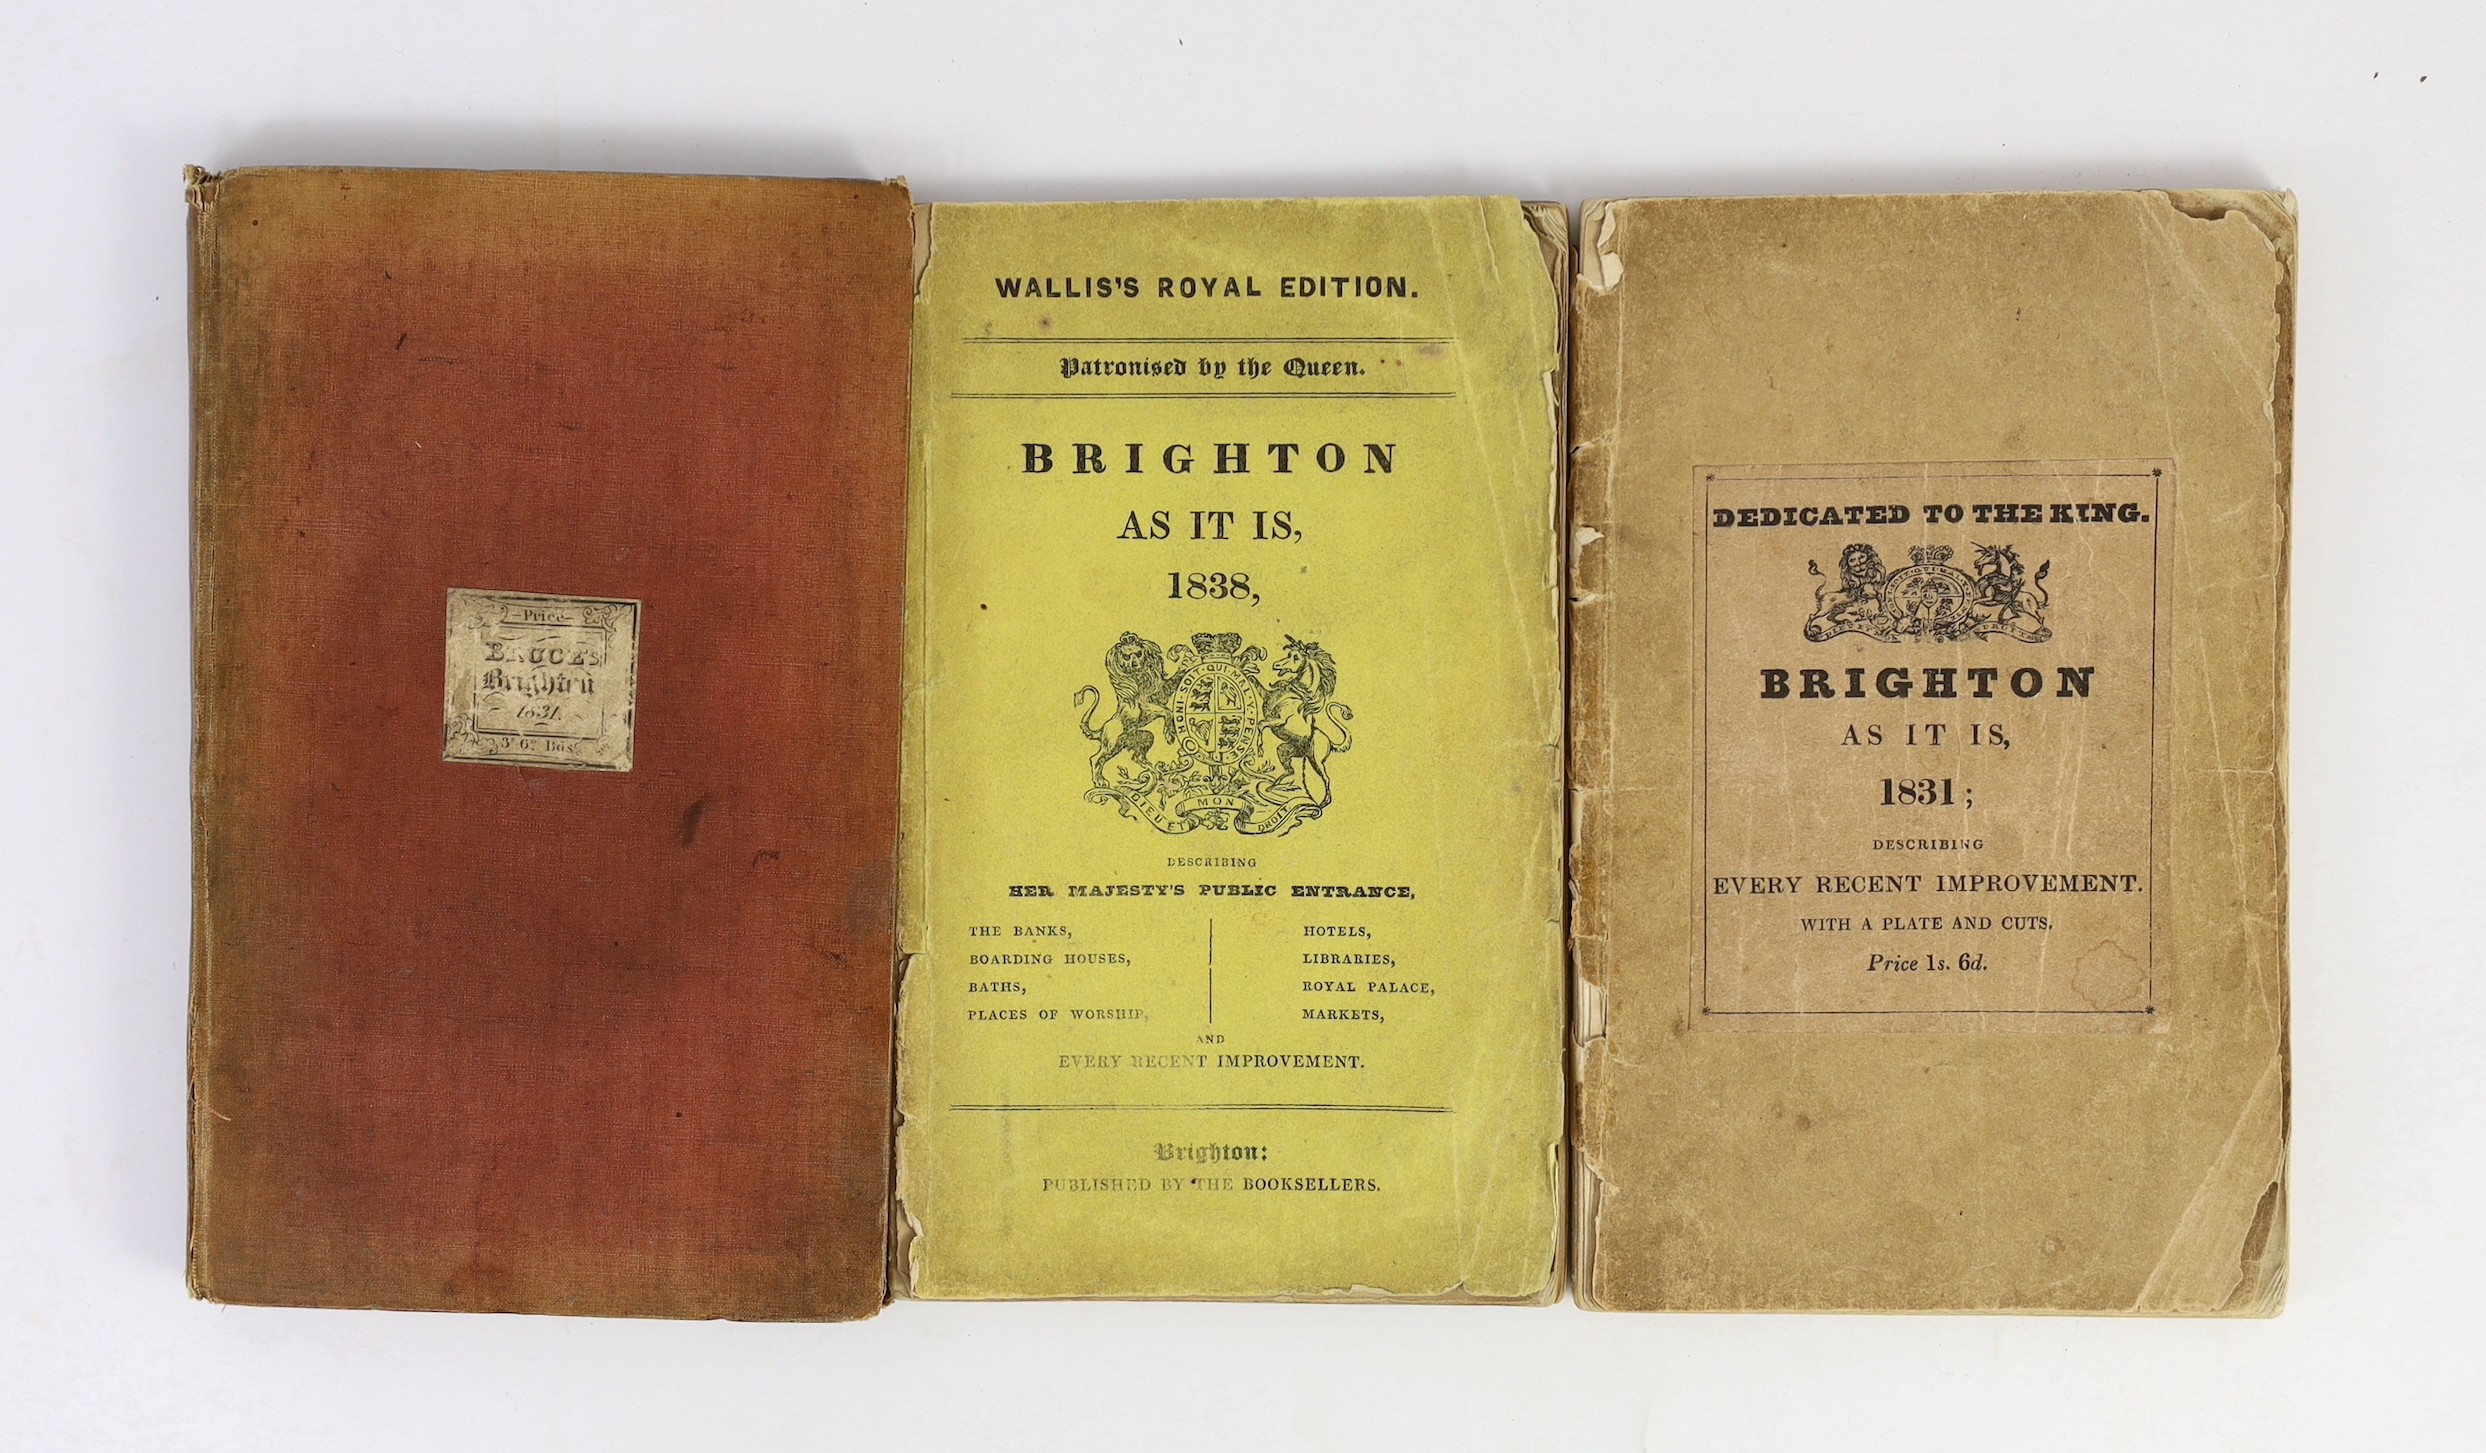 BRIGHTON: Brighton As It Is, 1831; describing every thing worthy of observation ... new edition. engraved frontis and text illus.; original printed wrappers, 12mo. published by E. Wallis, and sold by all the Booksellers